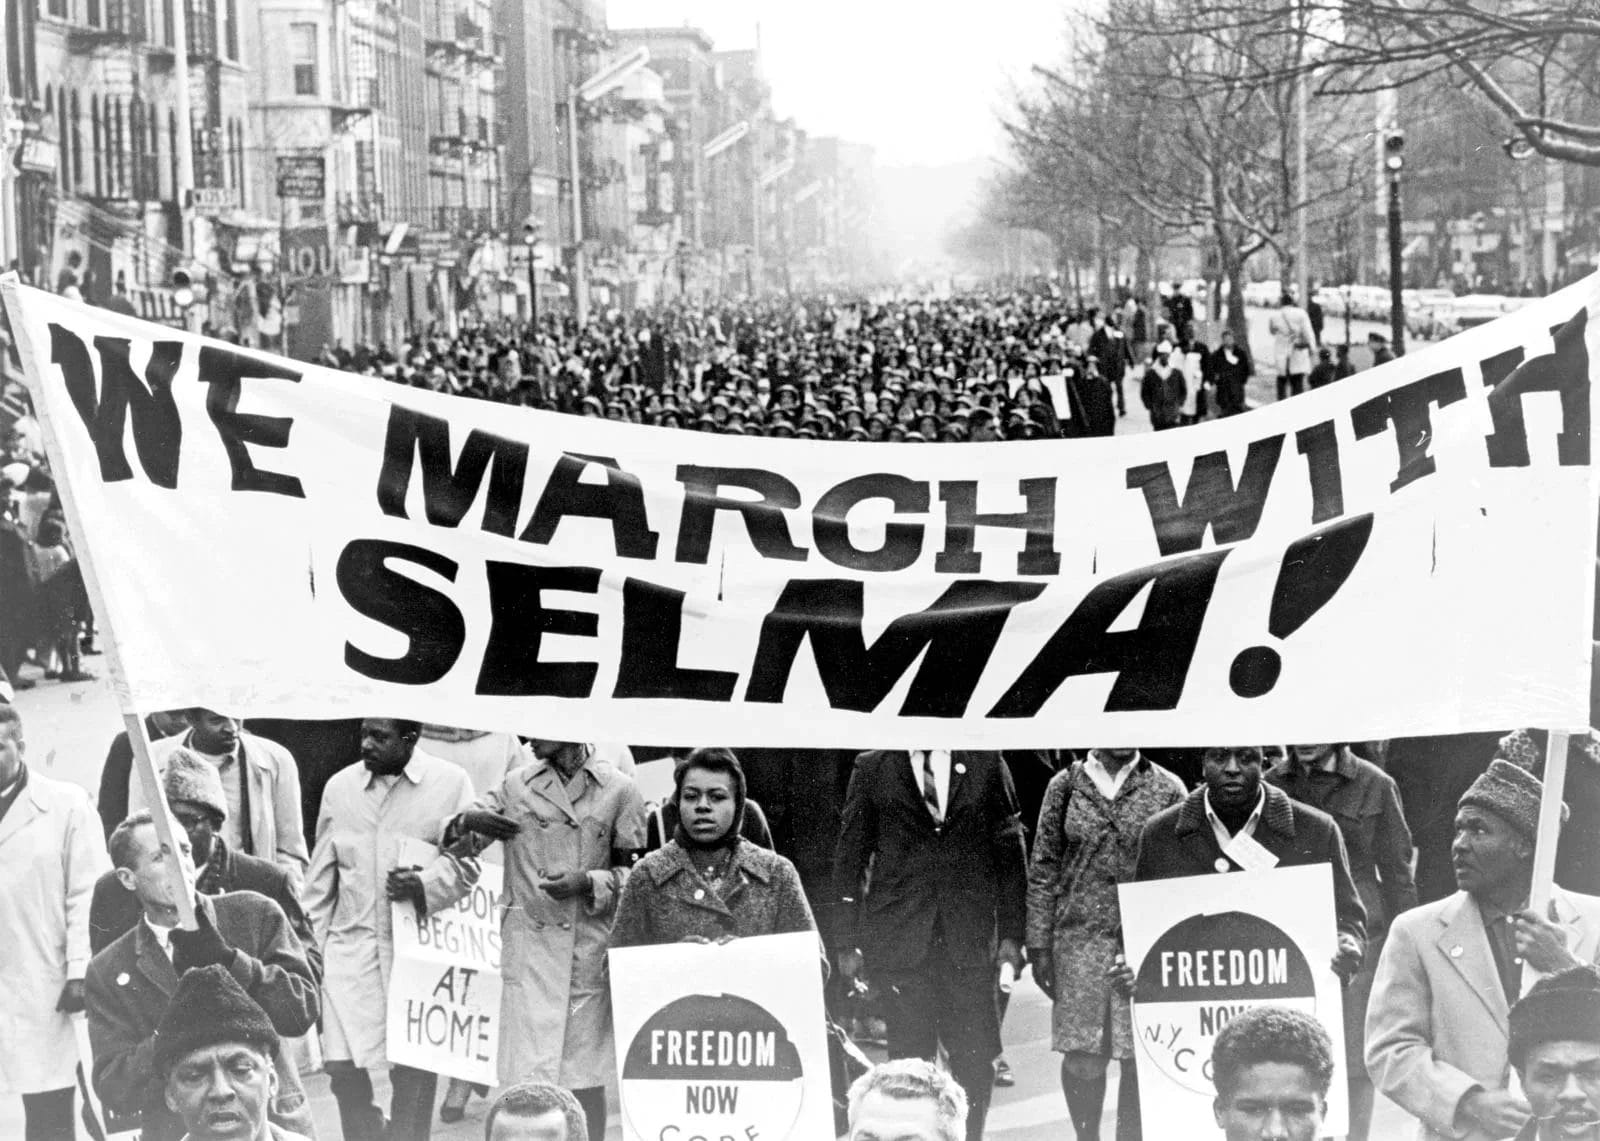 Selma to Montgomery marches (1965)